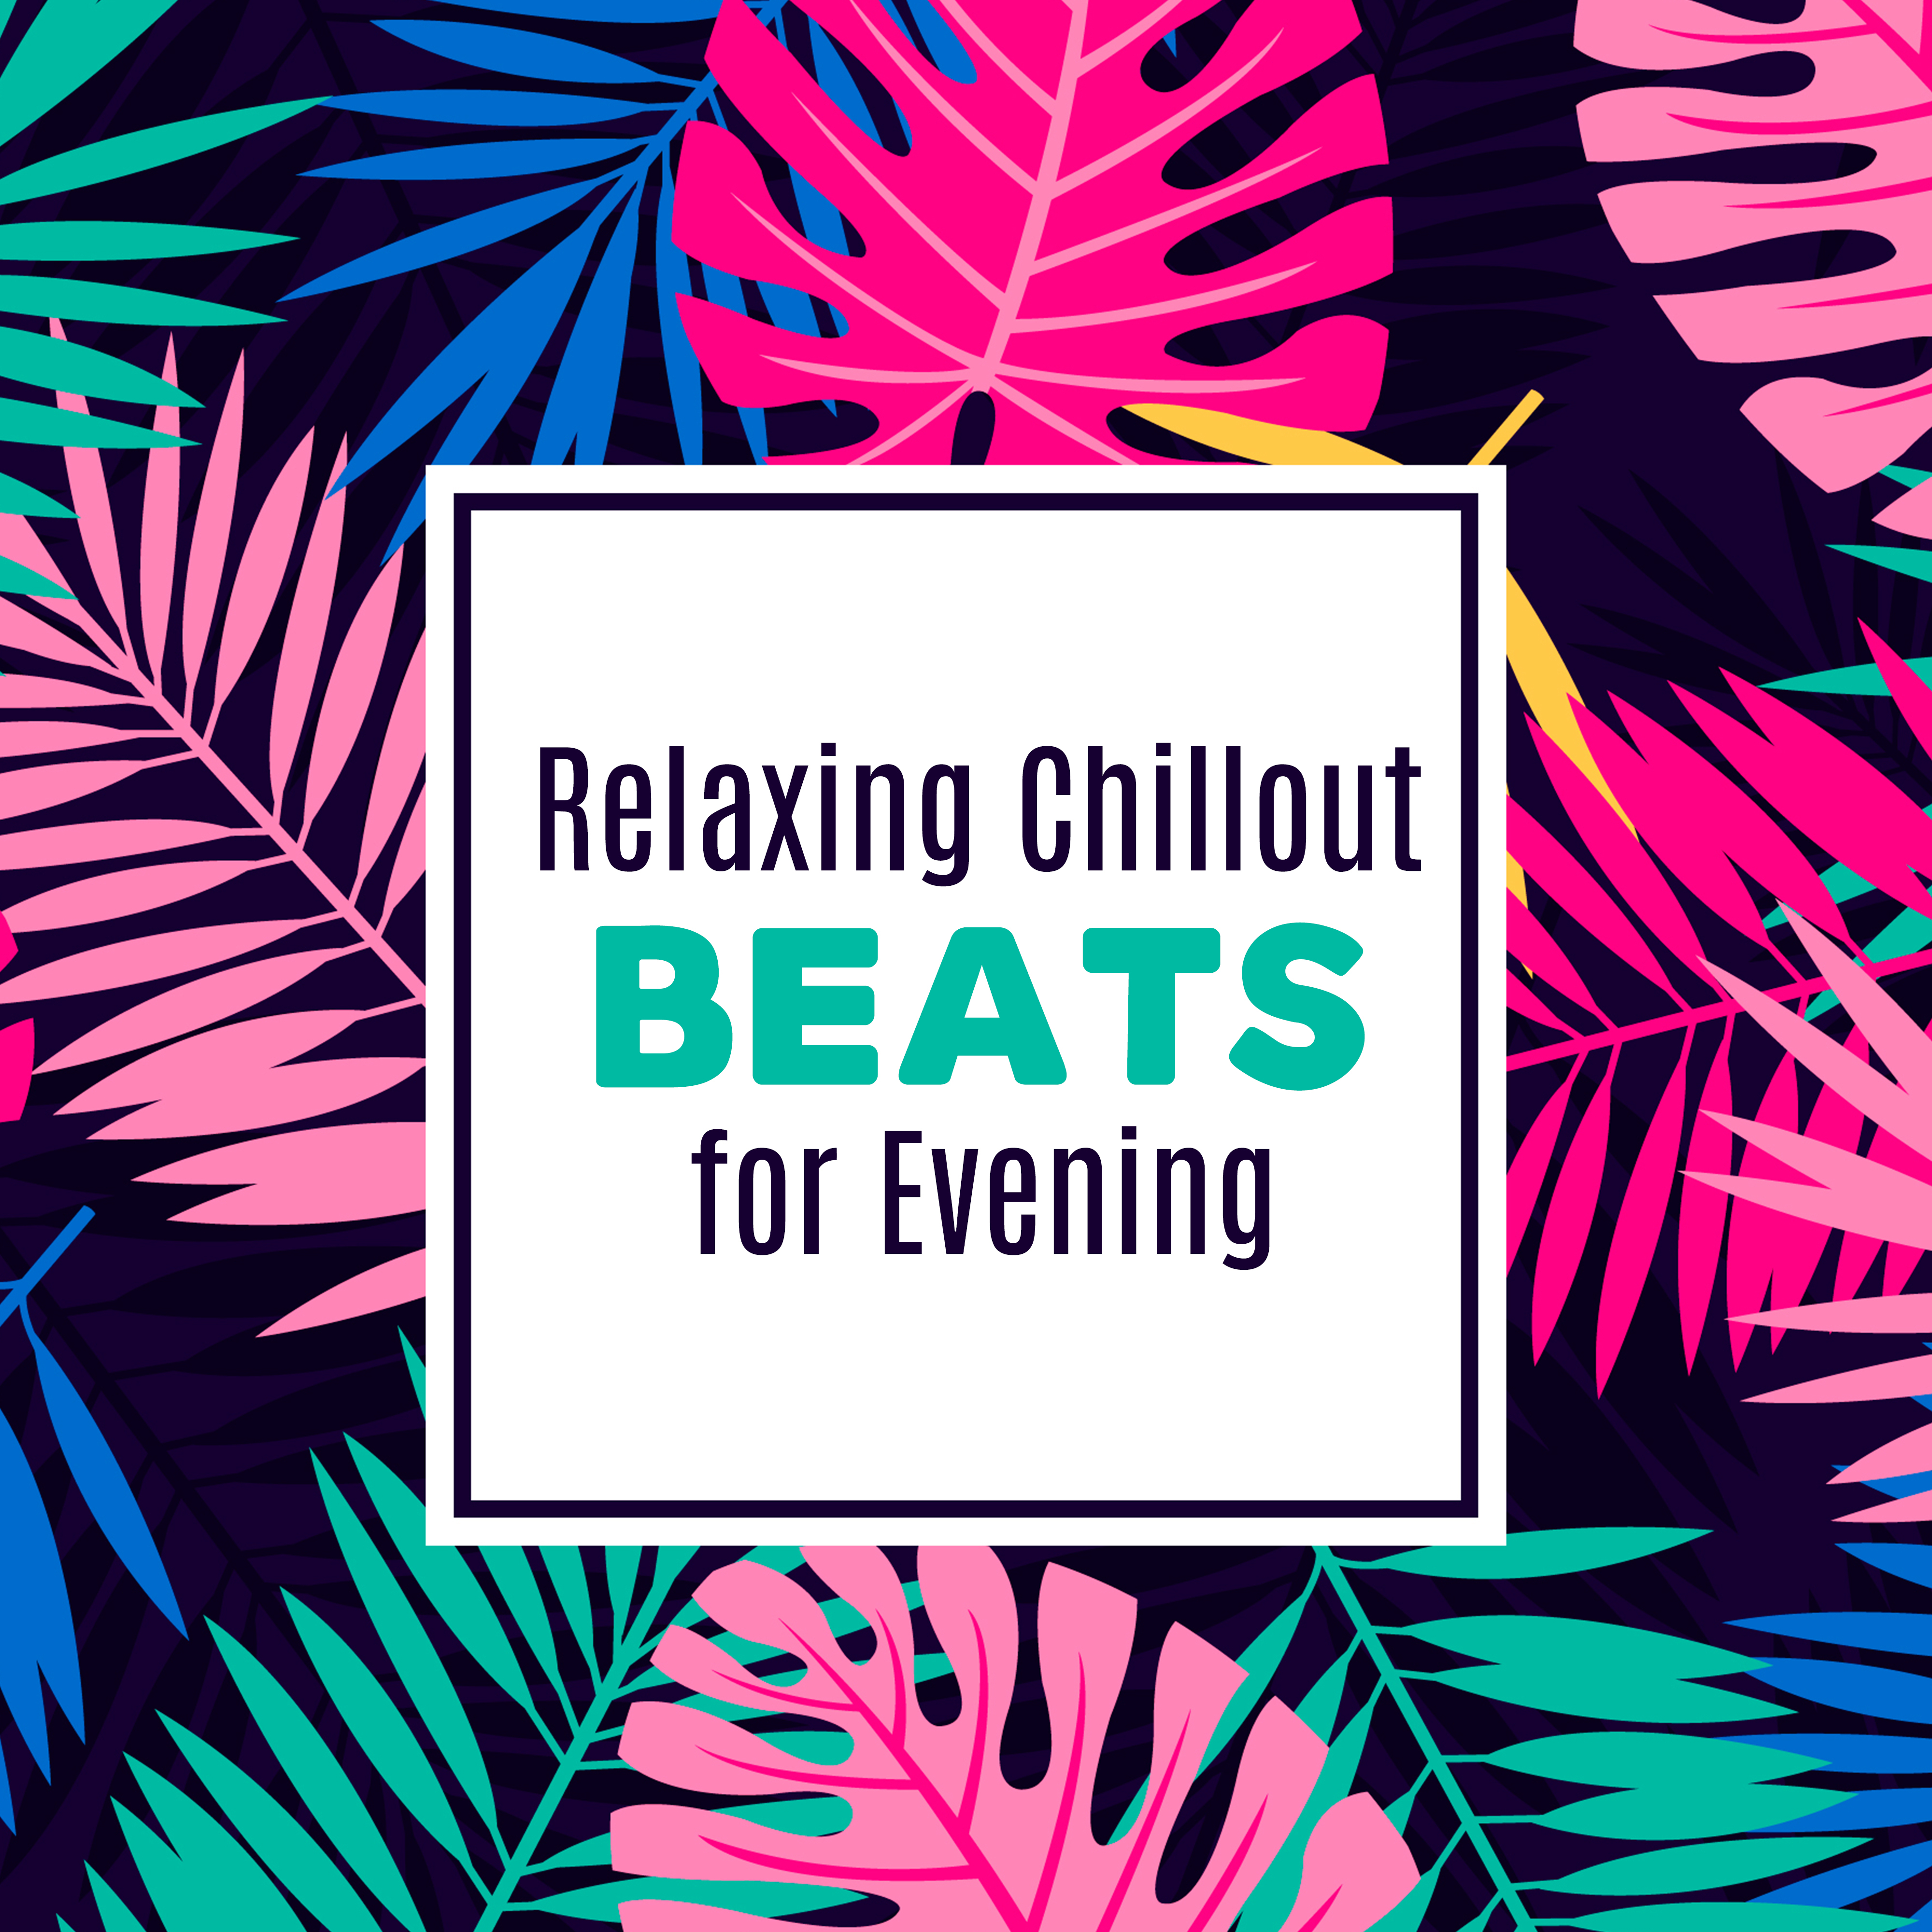 Relaxing Chillout Beats for Evening